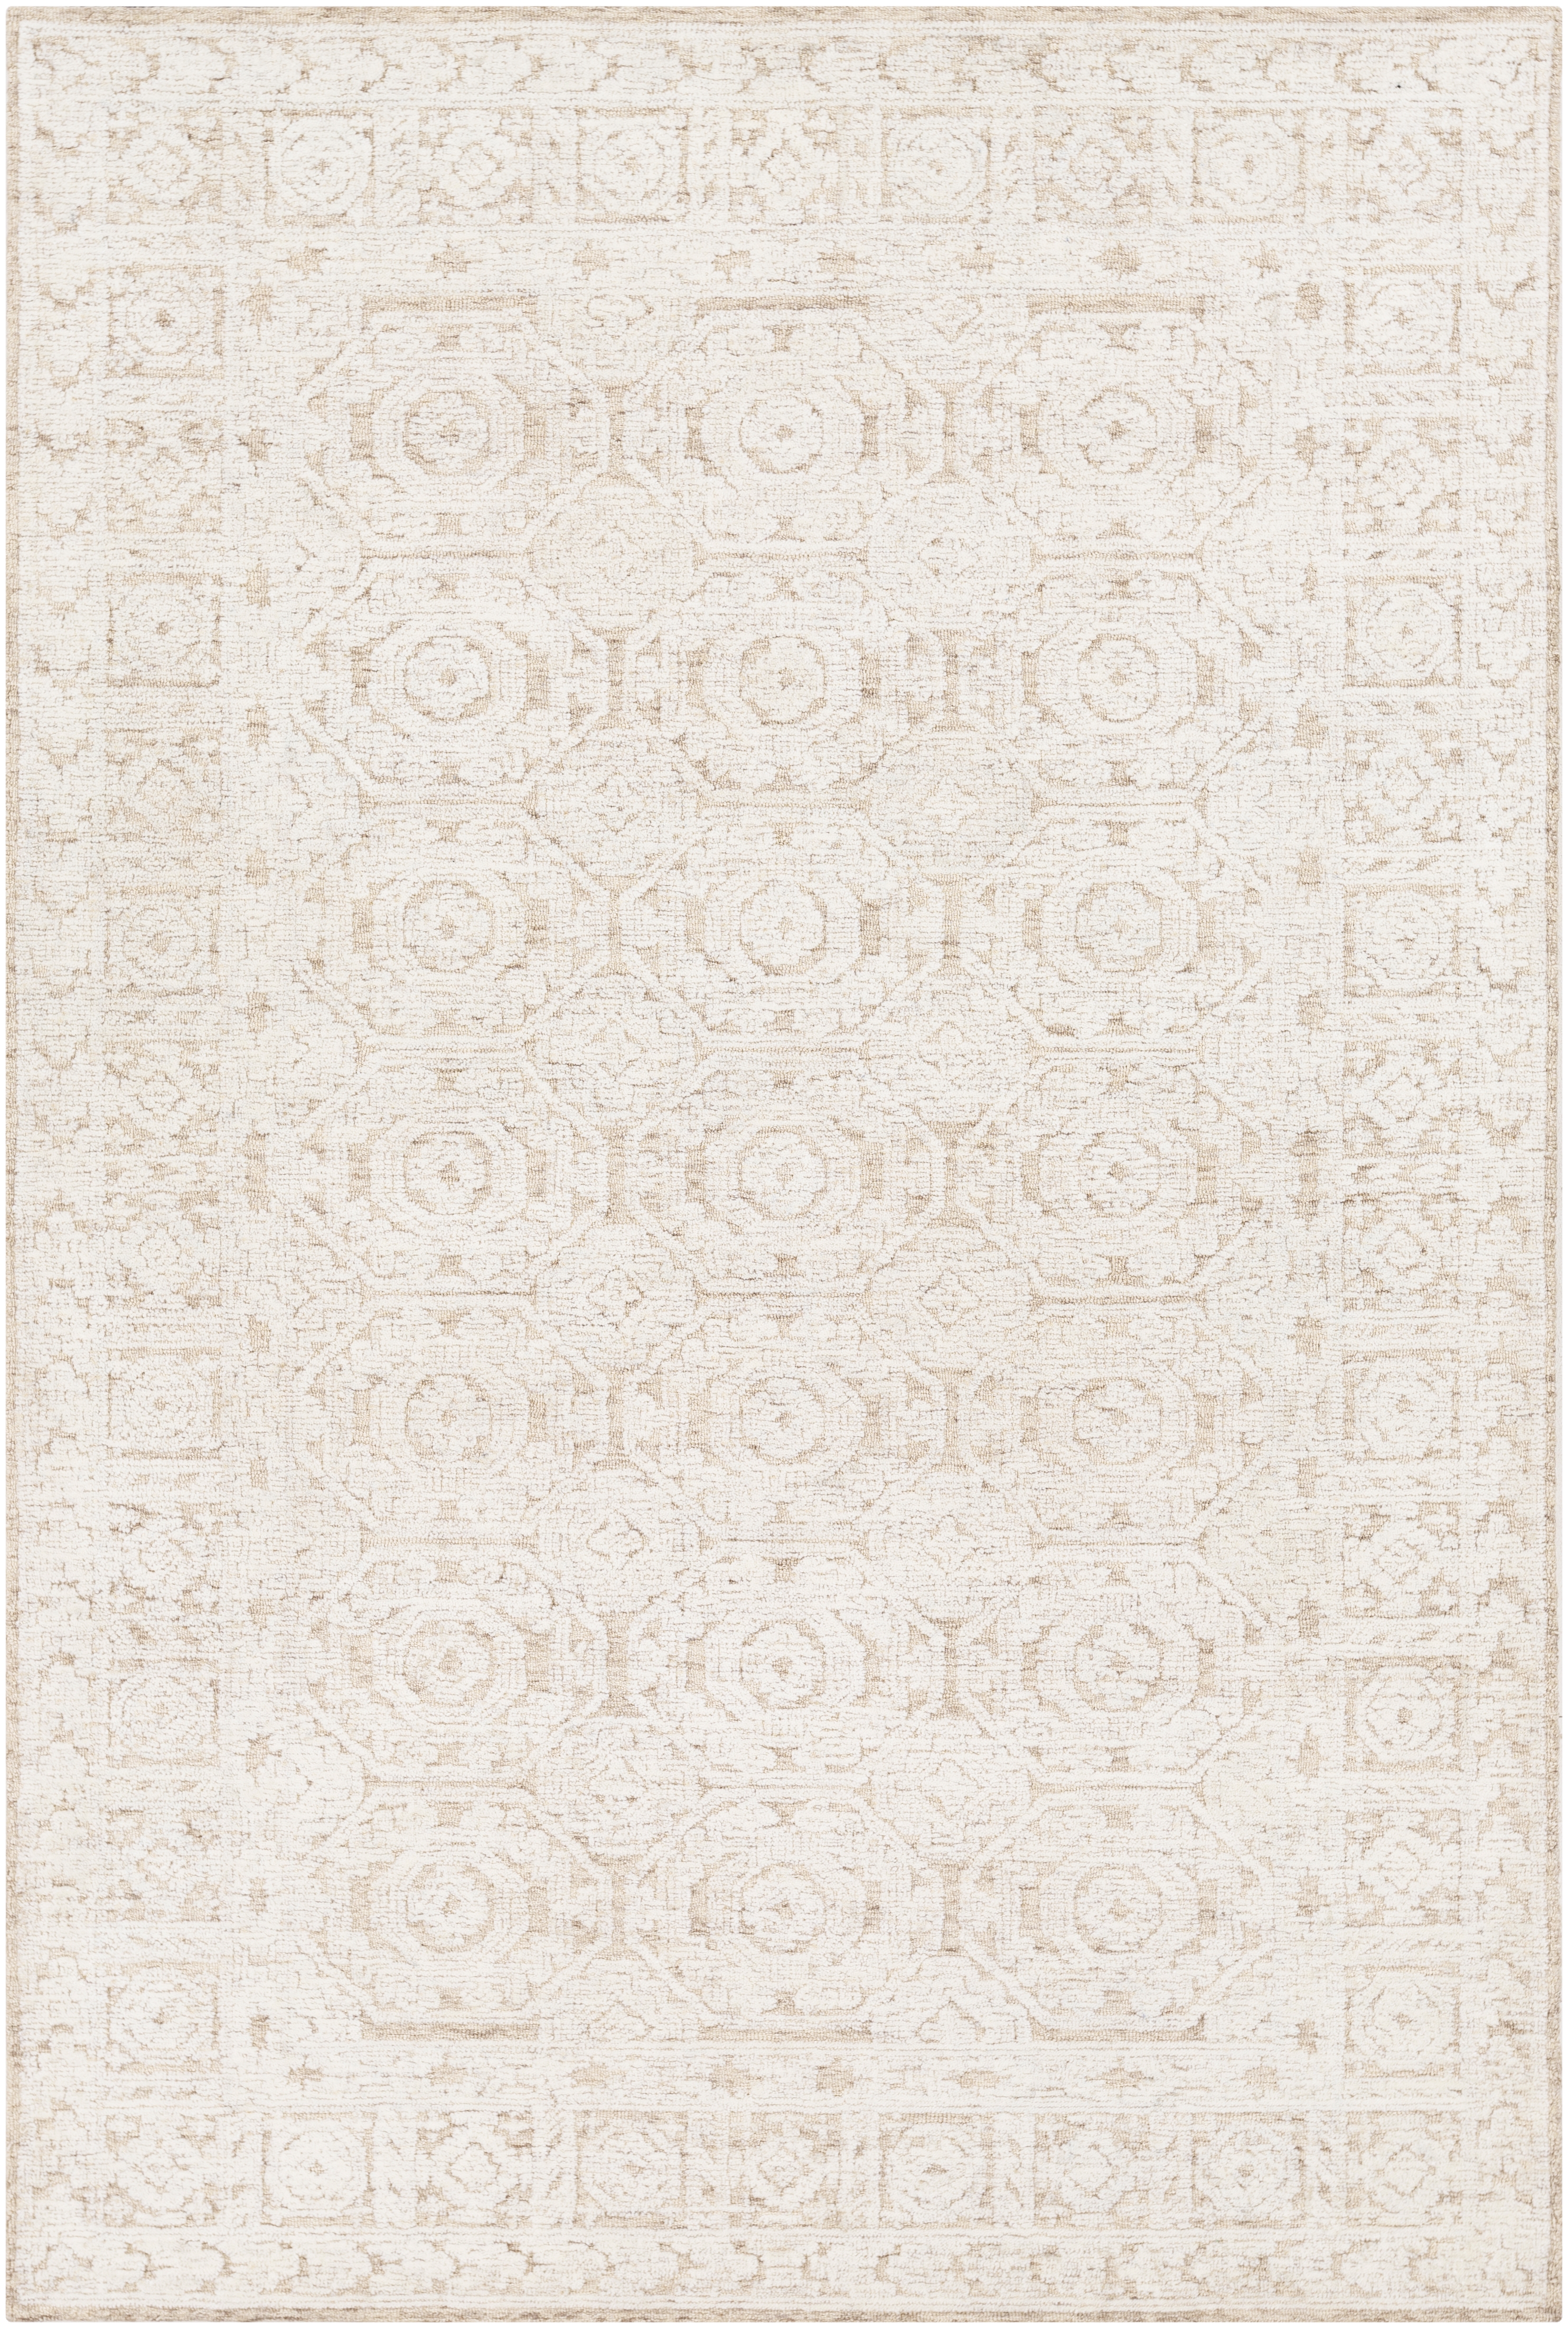 Louvre Rug, 2' x 3' - Image 0